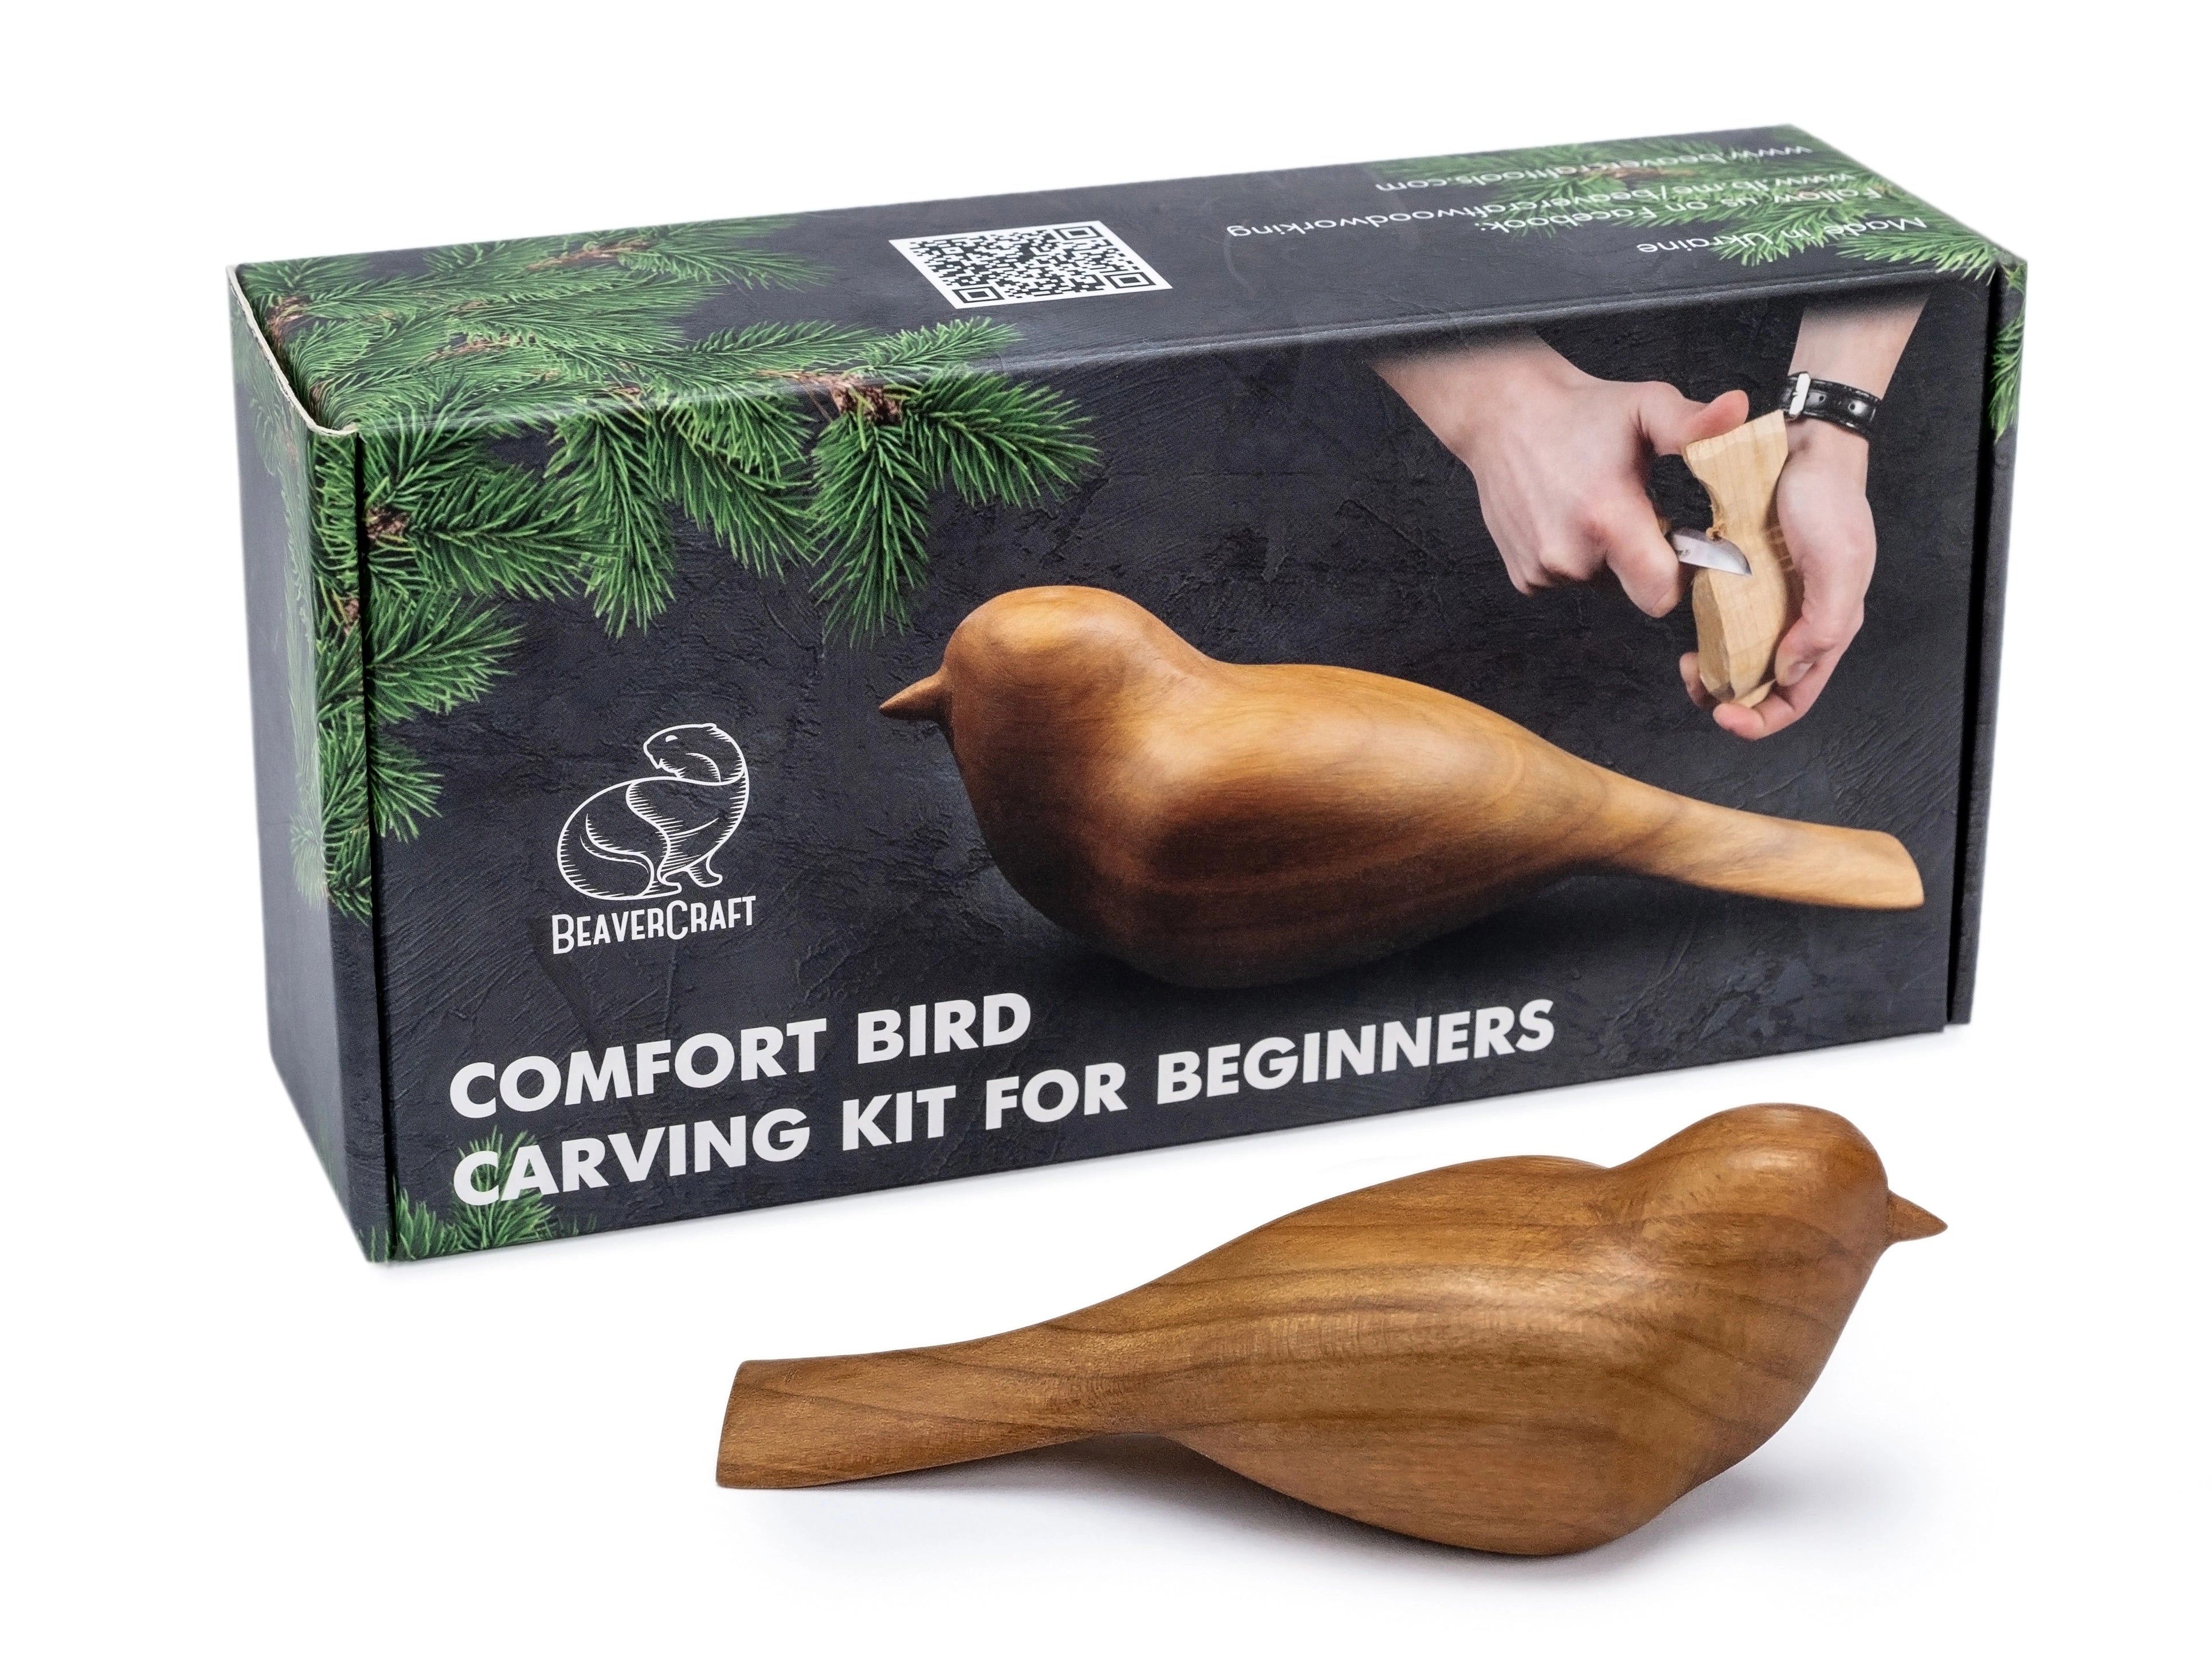 IMYMEE Wood Whittling Kit for Beginners-Complete Whittling Set with 4pcs  Wood